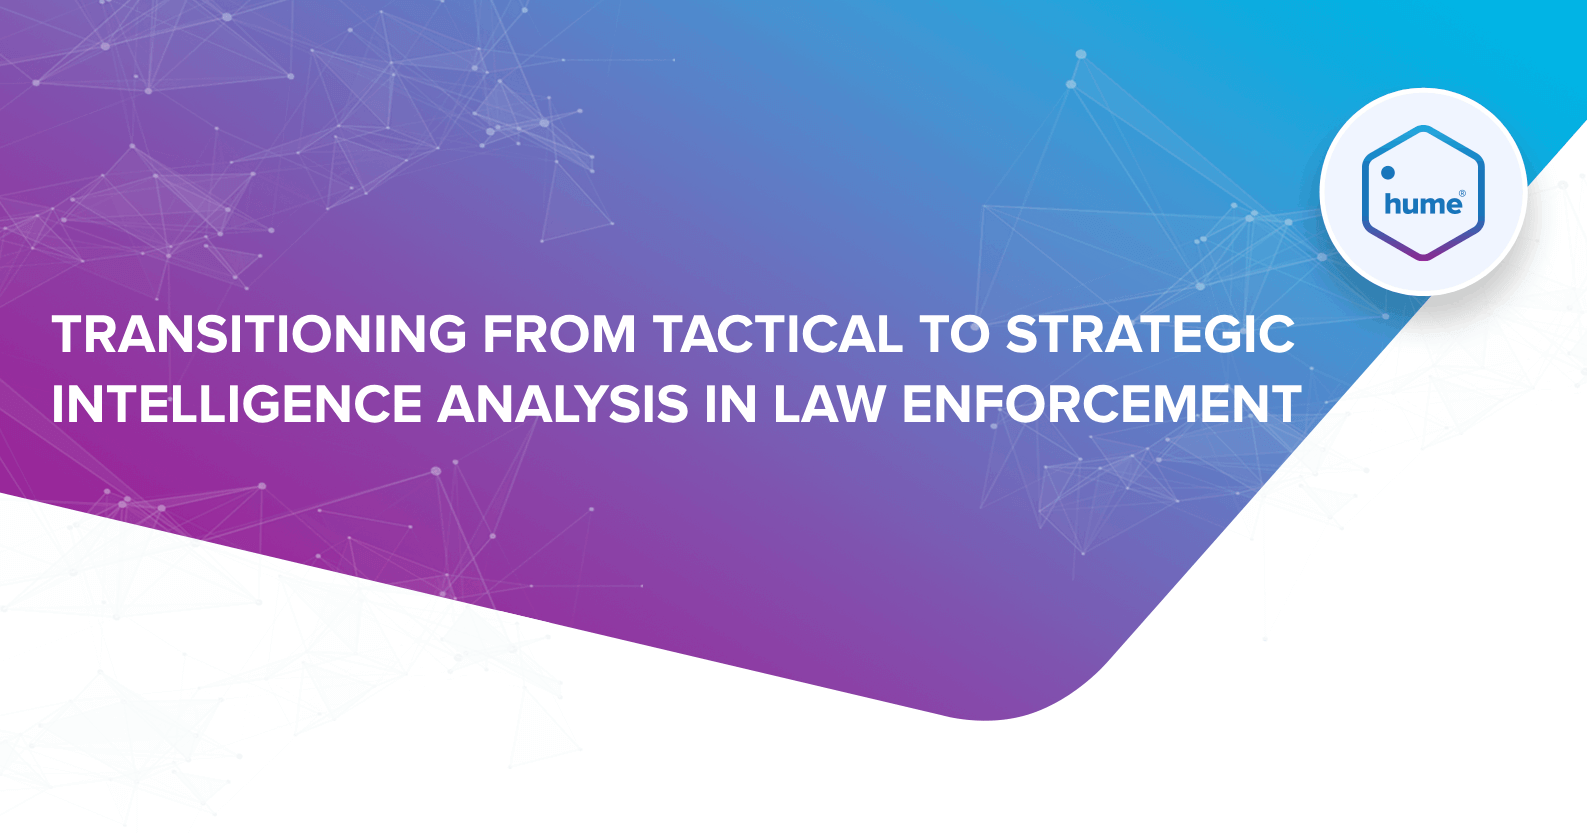 HUME: Transitioning from Tactical to Strategic Intelligence Analysis in Law Enforcement